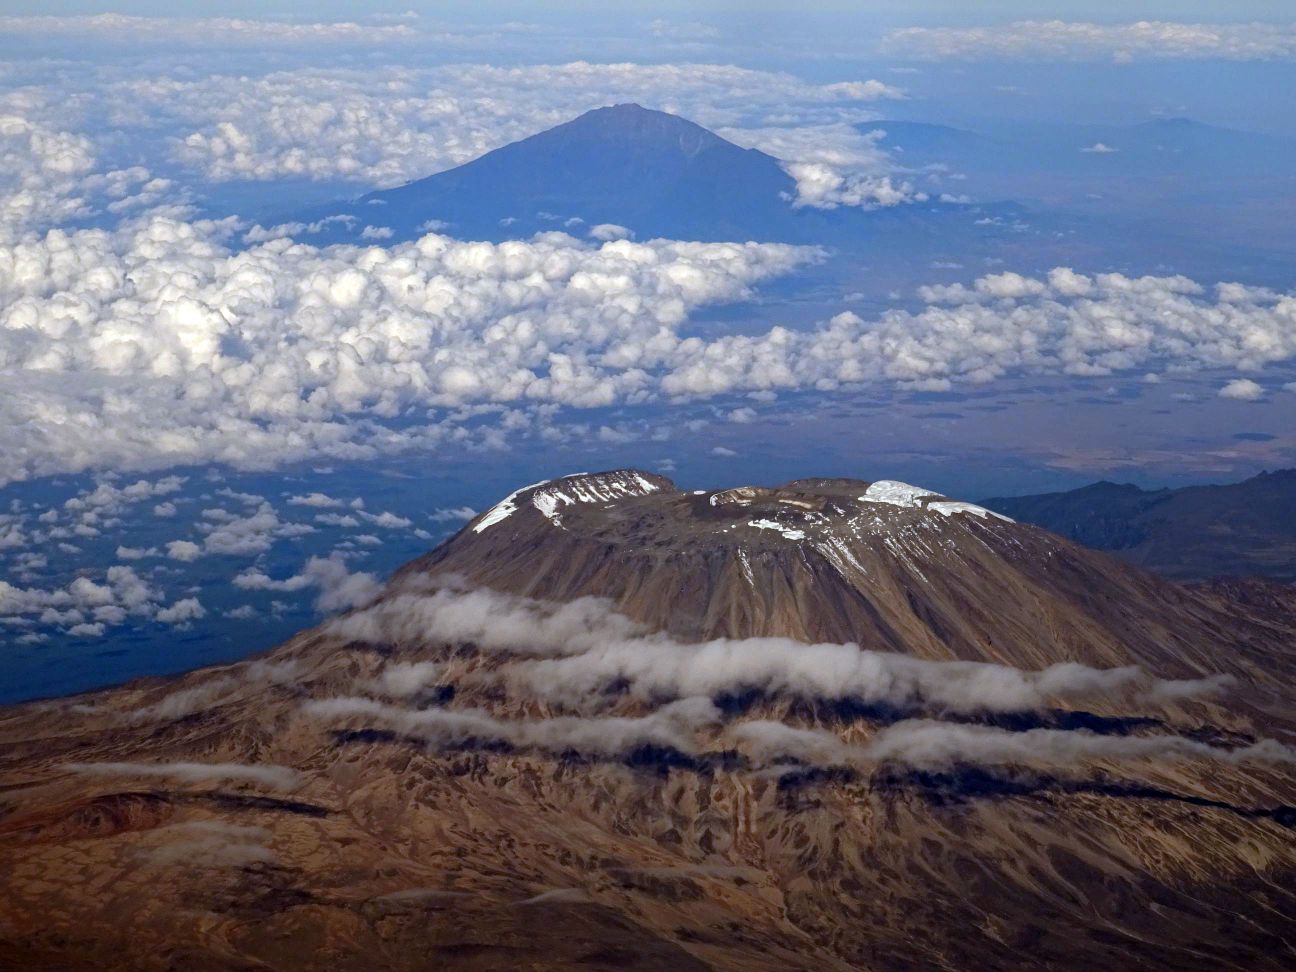 Mt Kilimanjaro in the foreground, Mt Meru in the background - stunning views from our flight over to Dar